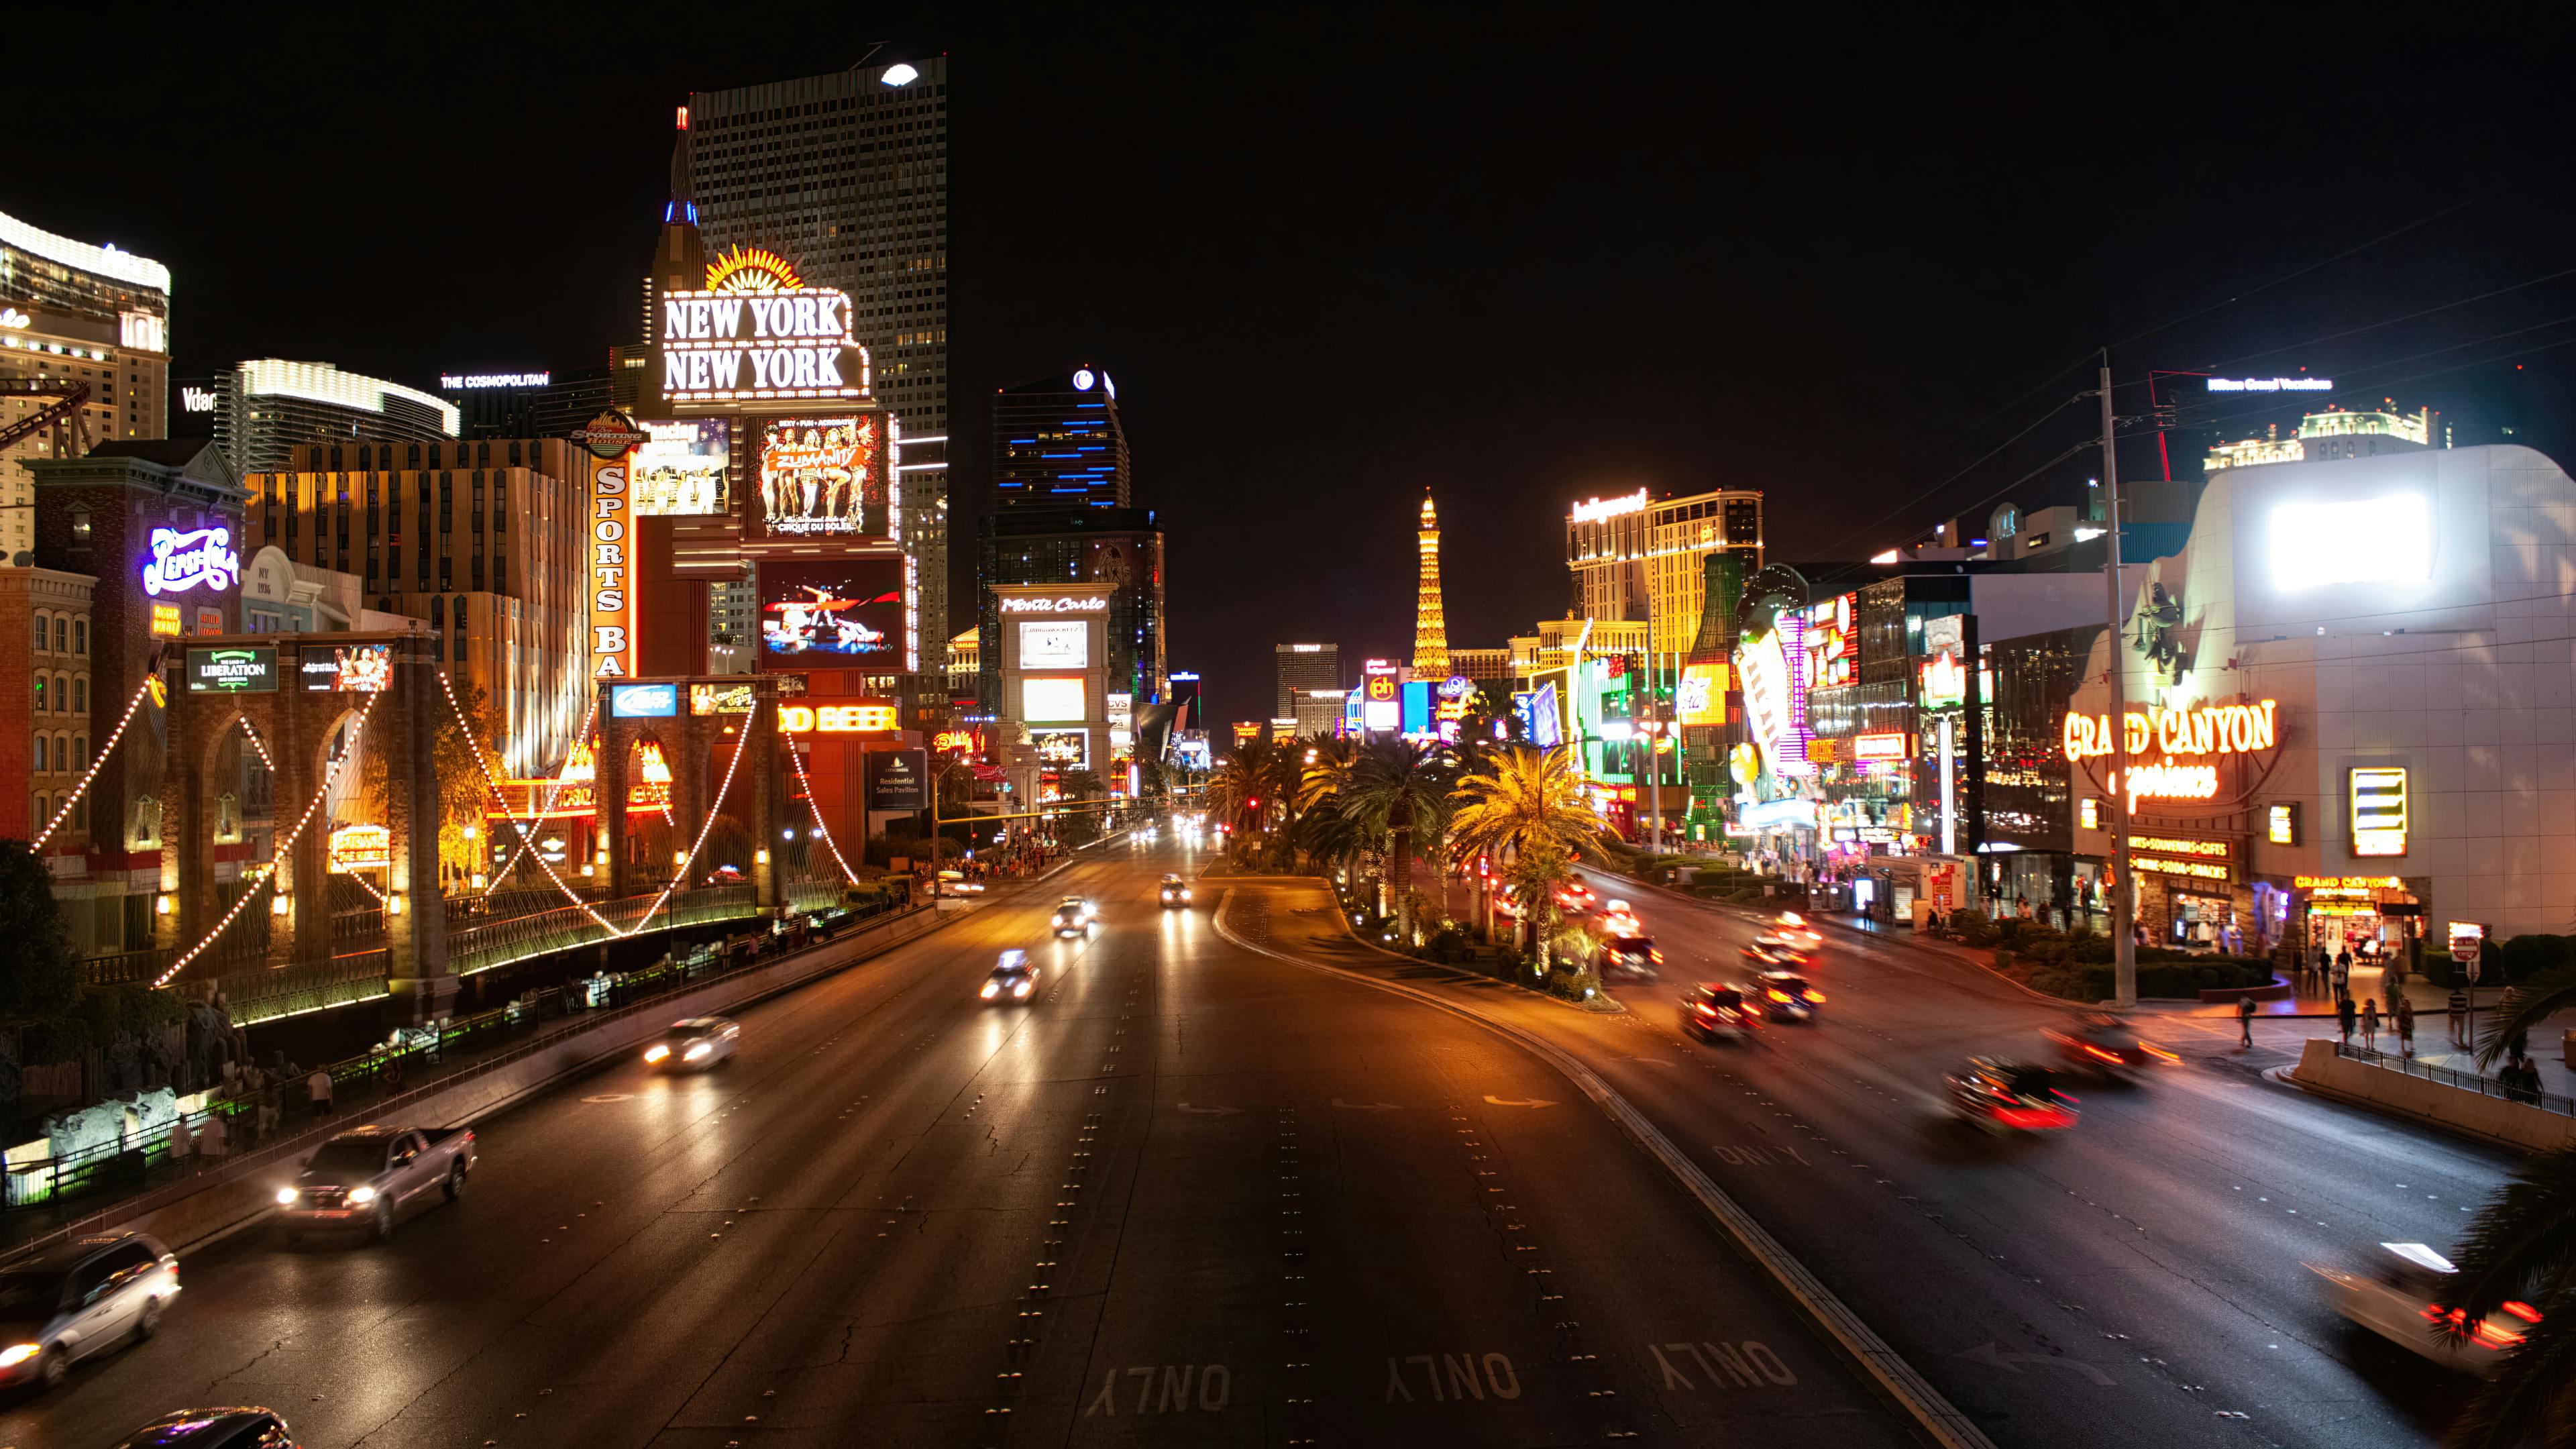 Aerial View Of Las Vegas City At Night Background, Picture Of The Las Vegas  Strip Background Image And Wallpaper for Free Download